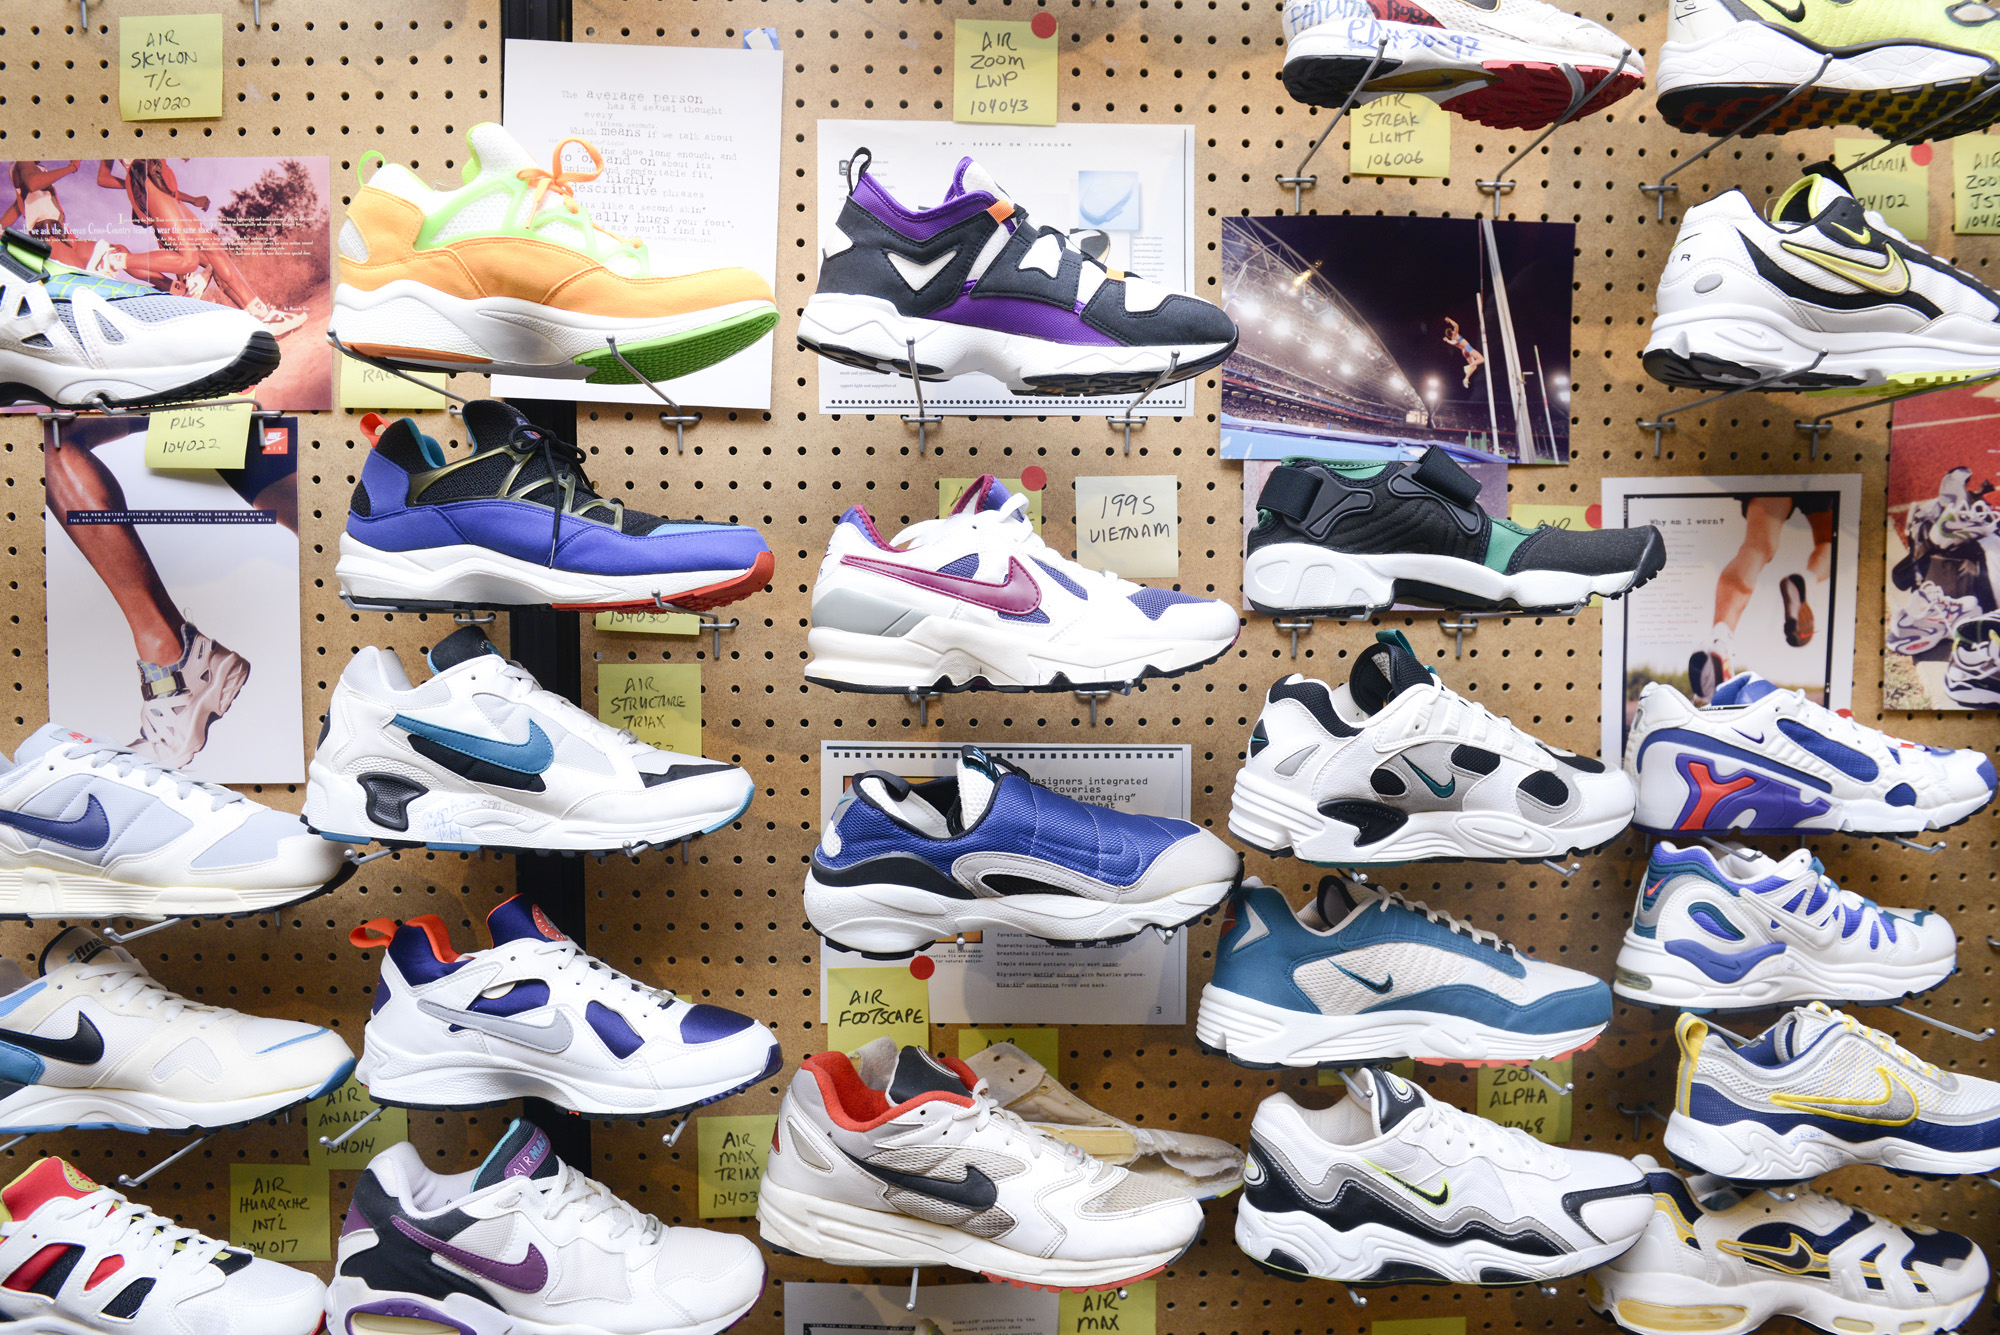 Coveture Inside Nike Archive 1